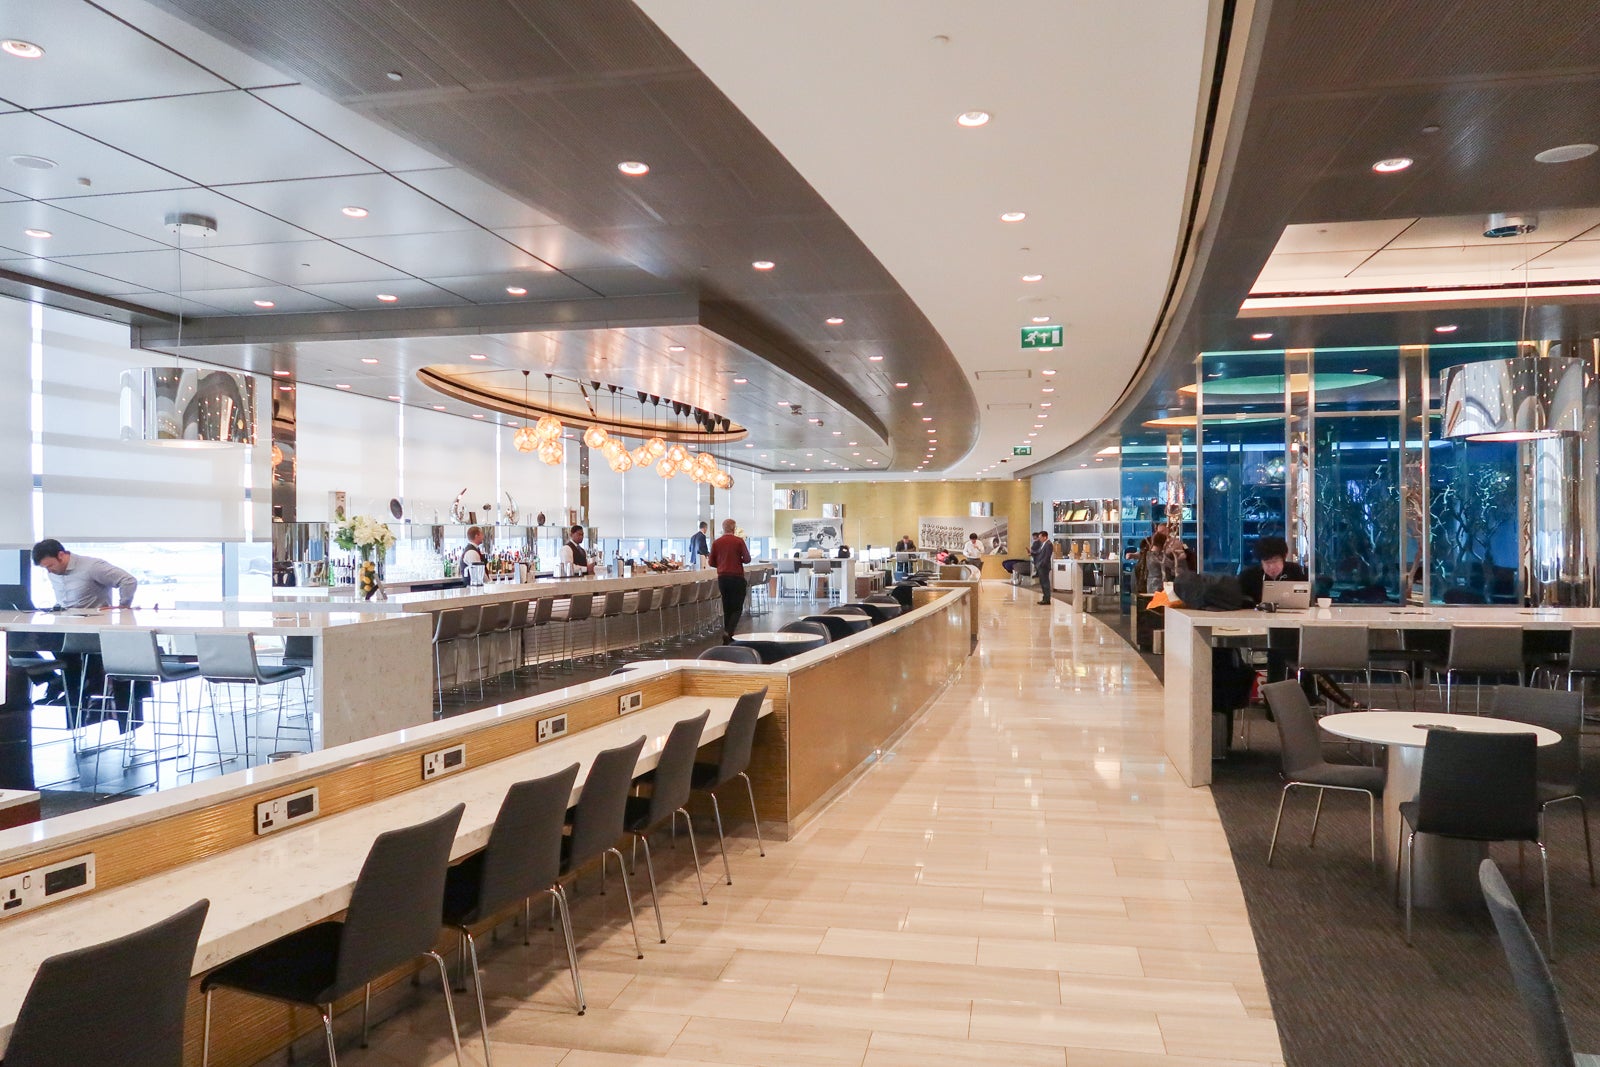 United Club at London Heathrow (Photo by Daniel Ross/The Points Guy)